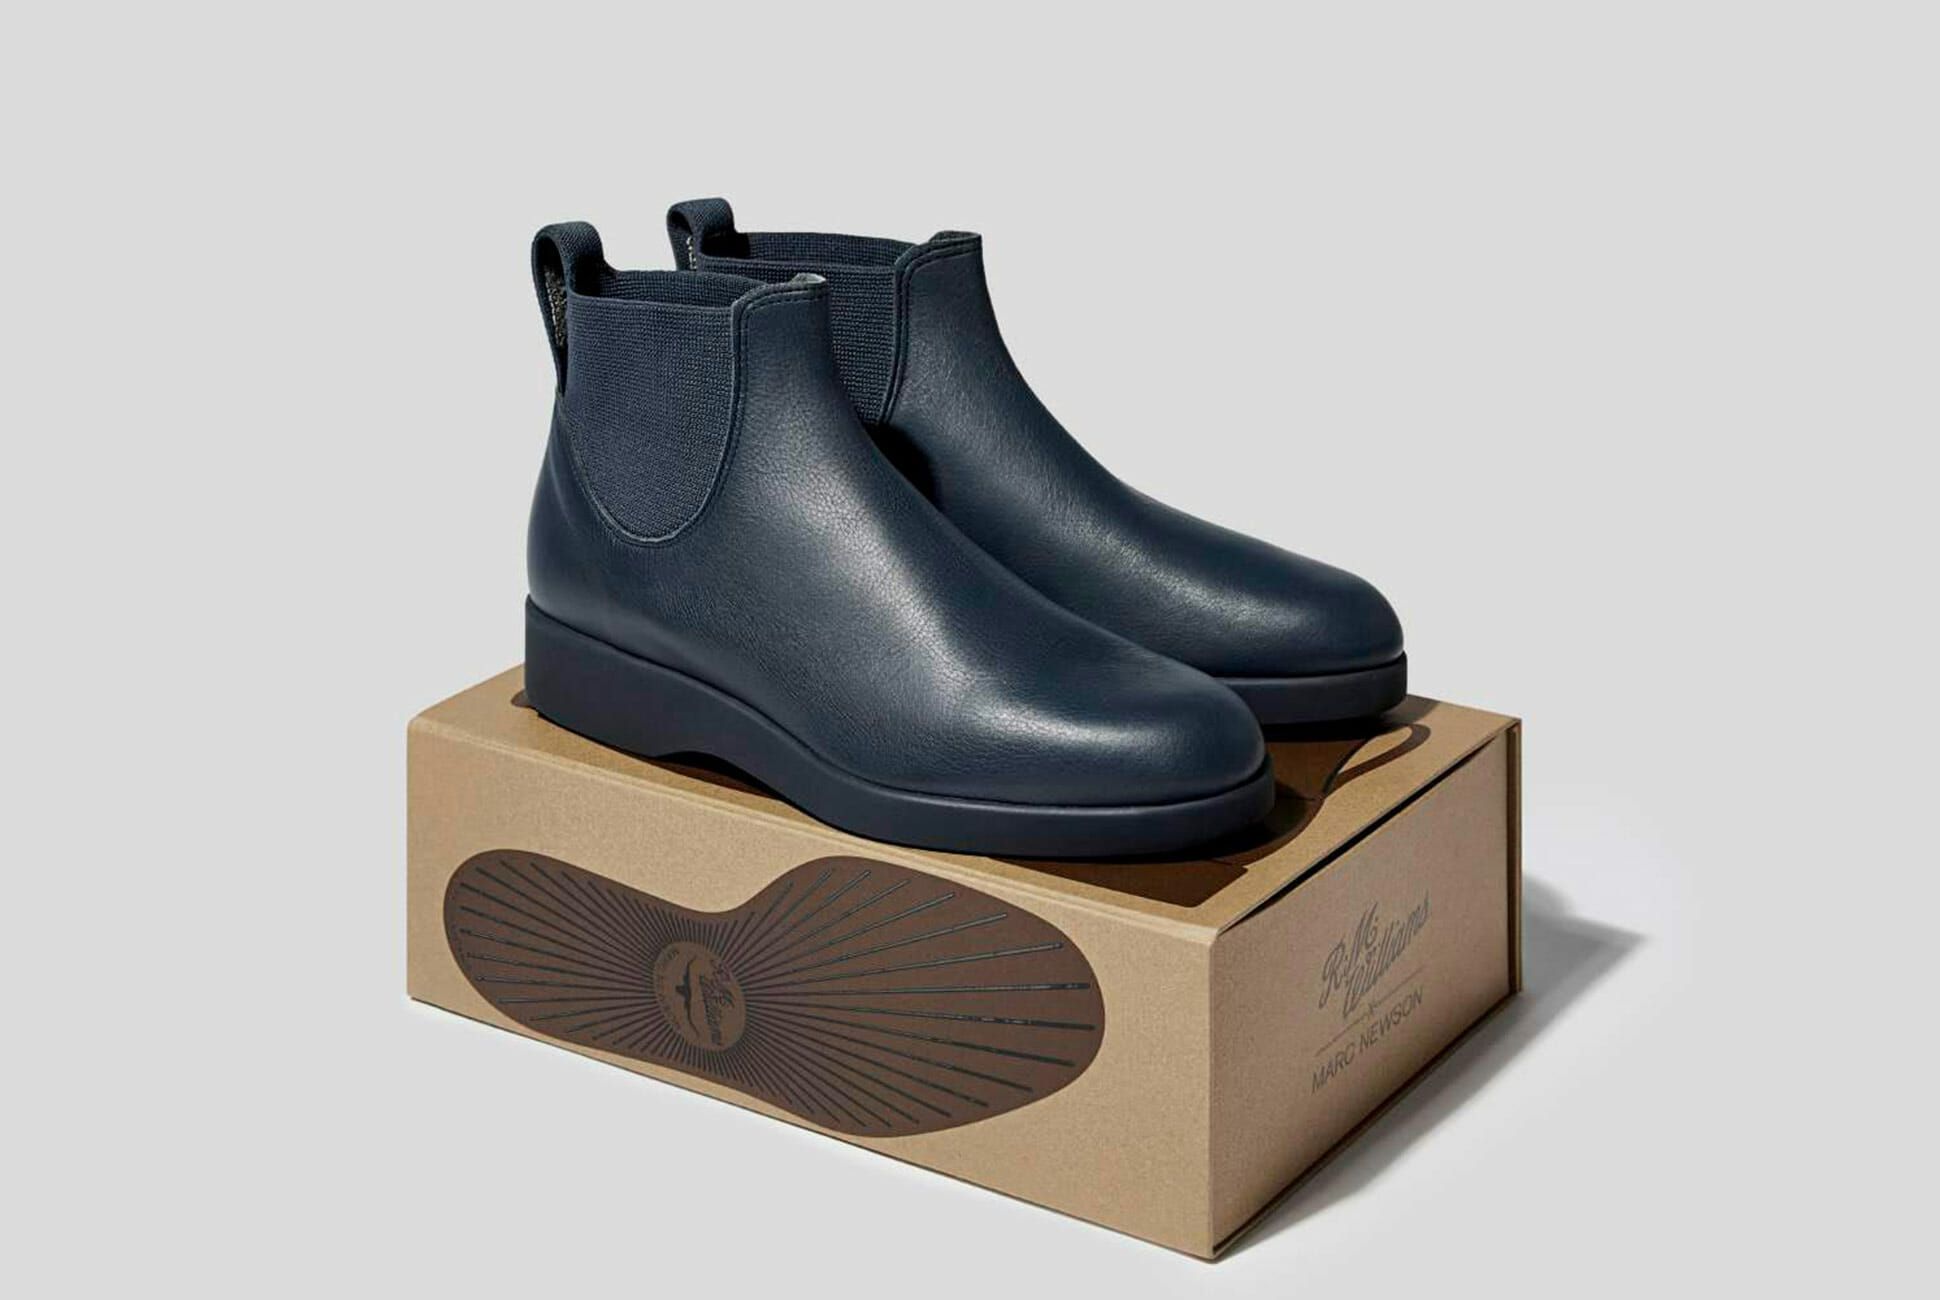 How to Find Discounted R.M. Williams Boots - Eagle Wools